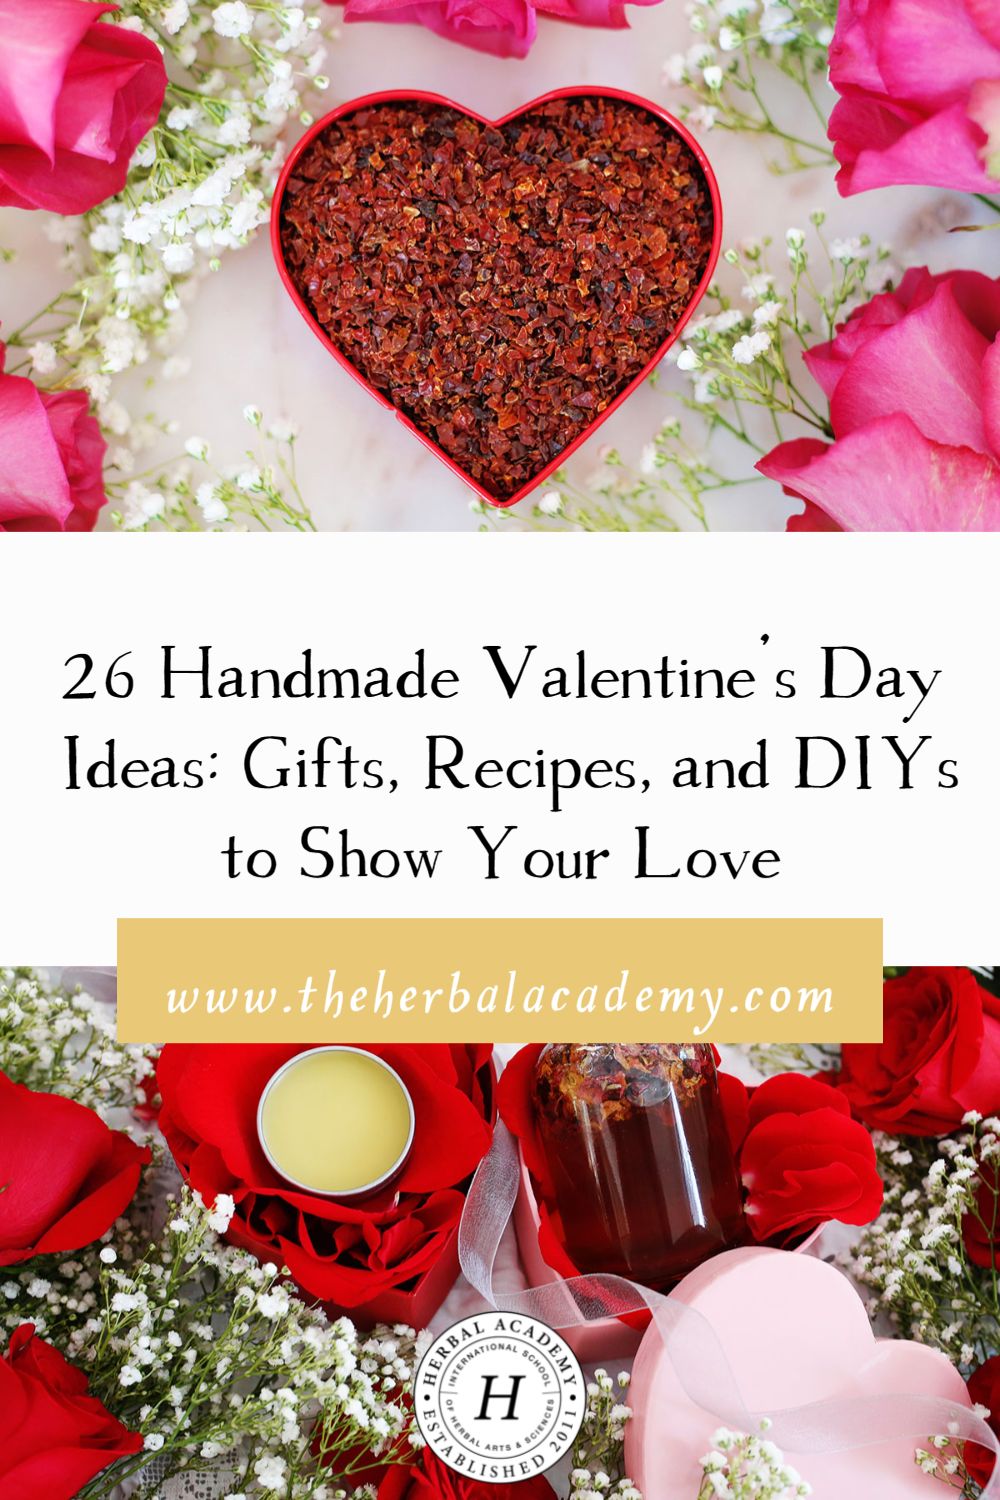 26 Handmade Valentine's Day Ideas: Gifts, Recipes, and DIYs to Show Your Love | Herbal Academy | We have pulled together 26 handmade Valentine’s Day ideas that will help you find the perfect floral gift as well as unique herbal-inspired ways to celebrate this day of love!